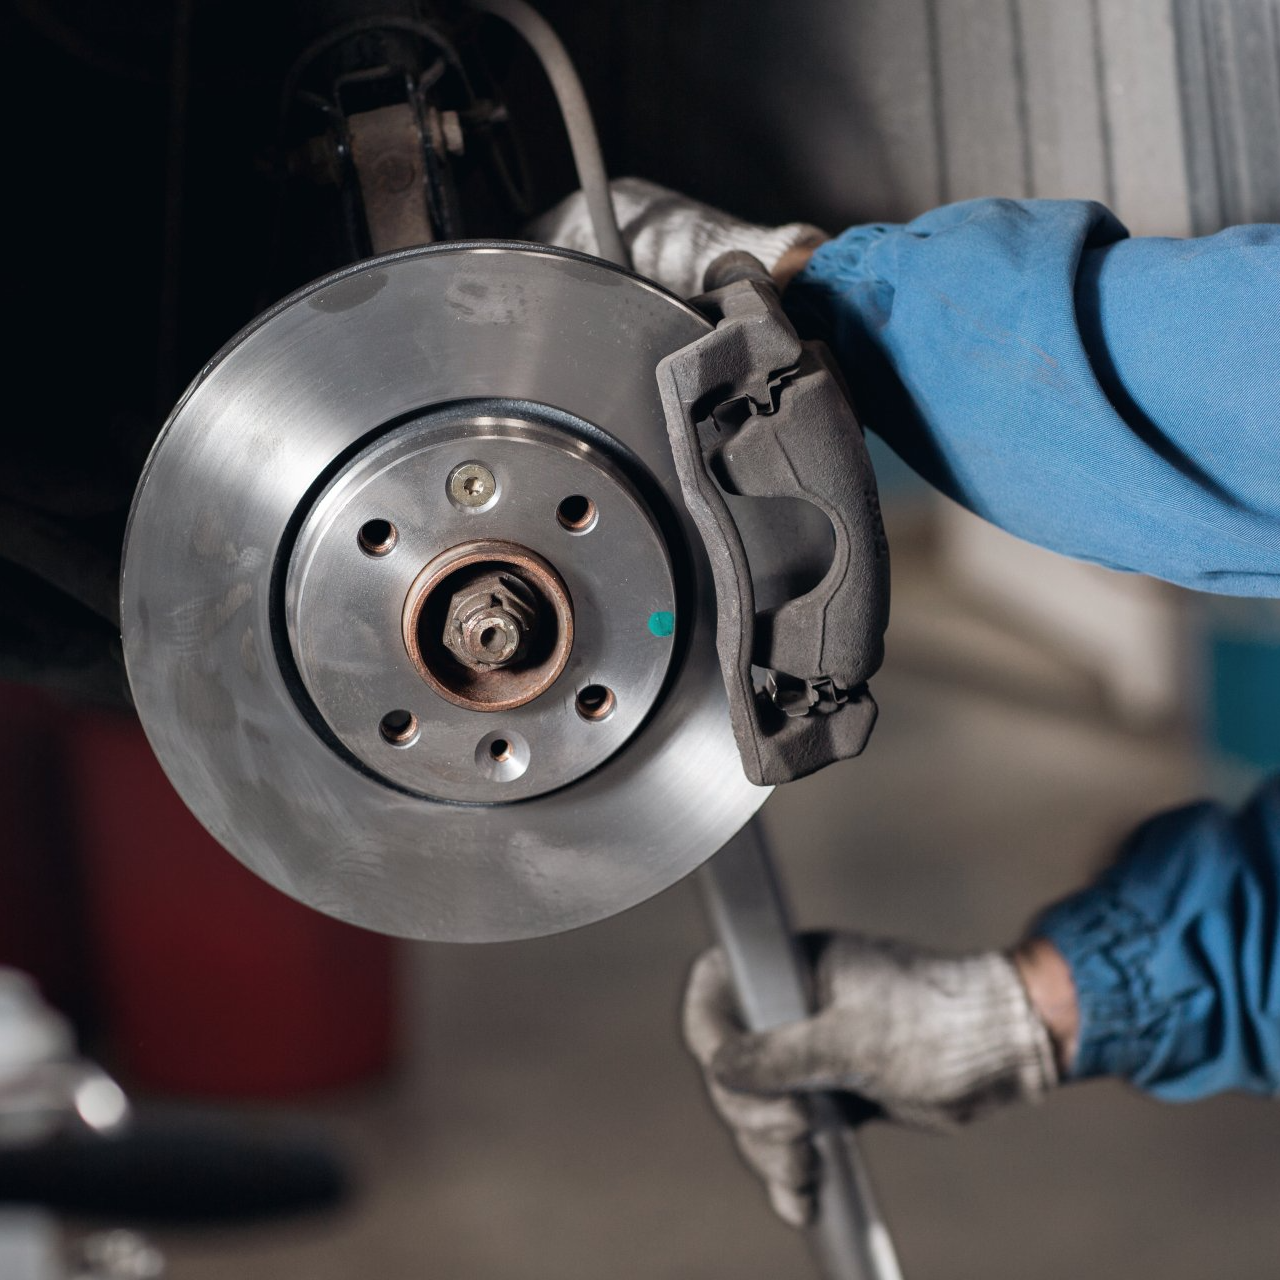 Possibly the most important safety feature on any vehicle is the brake system. That's why UCan DoIt Garage offers brake maintenance, repair and replacement services in Missoula, MT. Whether you need your vehicle's brake fluid flushed or your entire system replaced, our crew can get the job done right.  Don't wait for your minor brake repair to turn into an expensive replacement - call 406-549-0323 now to schedule an appointment at our auto repair shop.